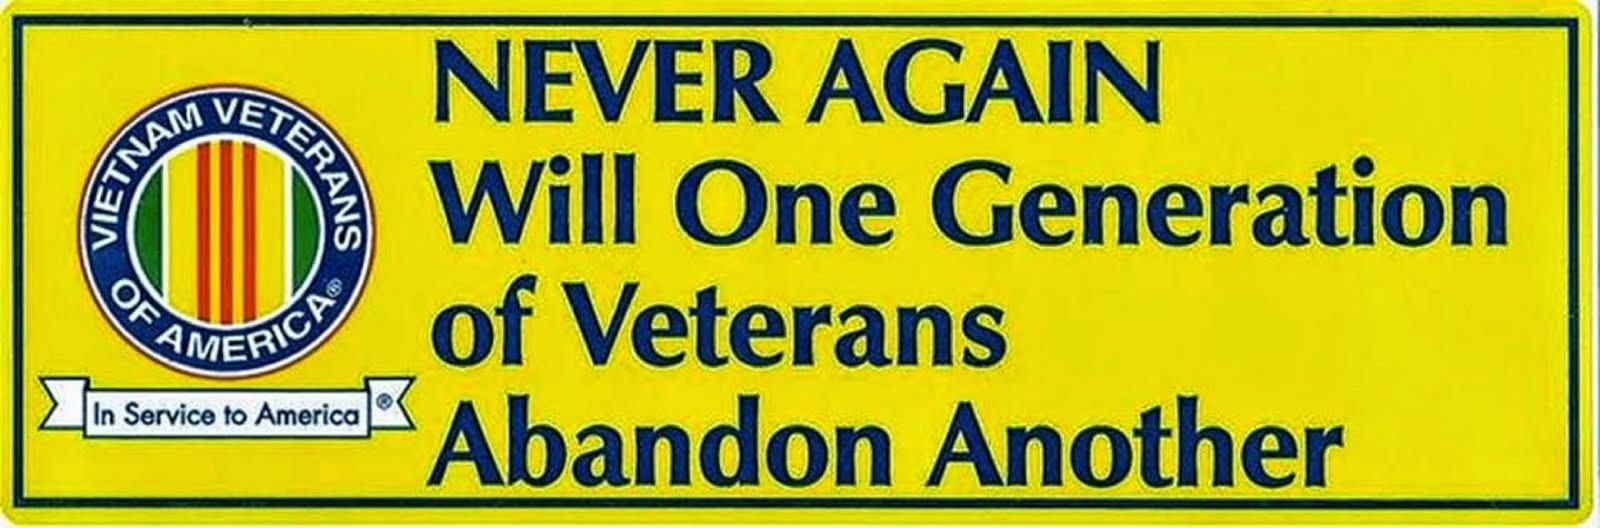 "NEVER AGAIN SHALL ONE GENERATION OF VETERANS ABANDON ANOTHER"